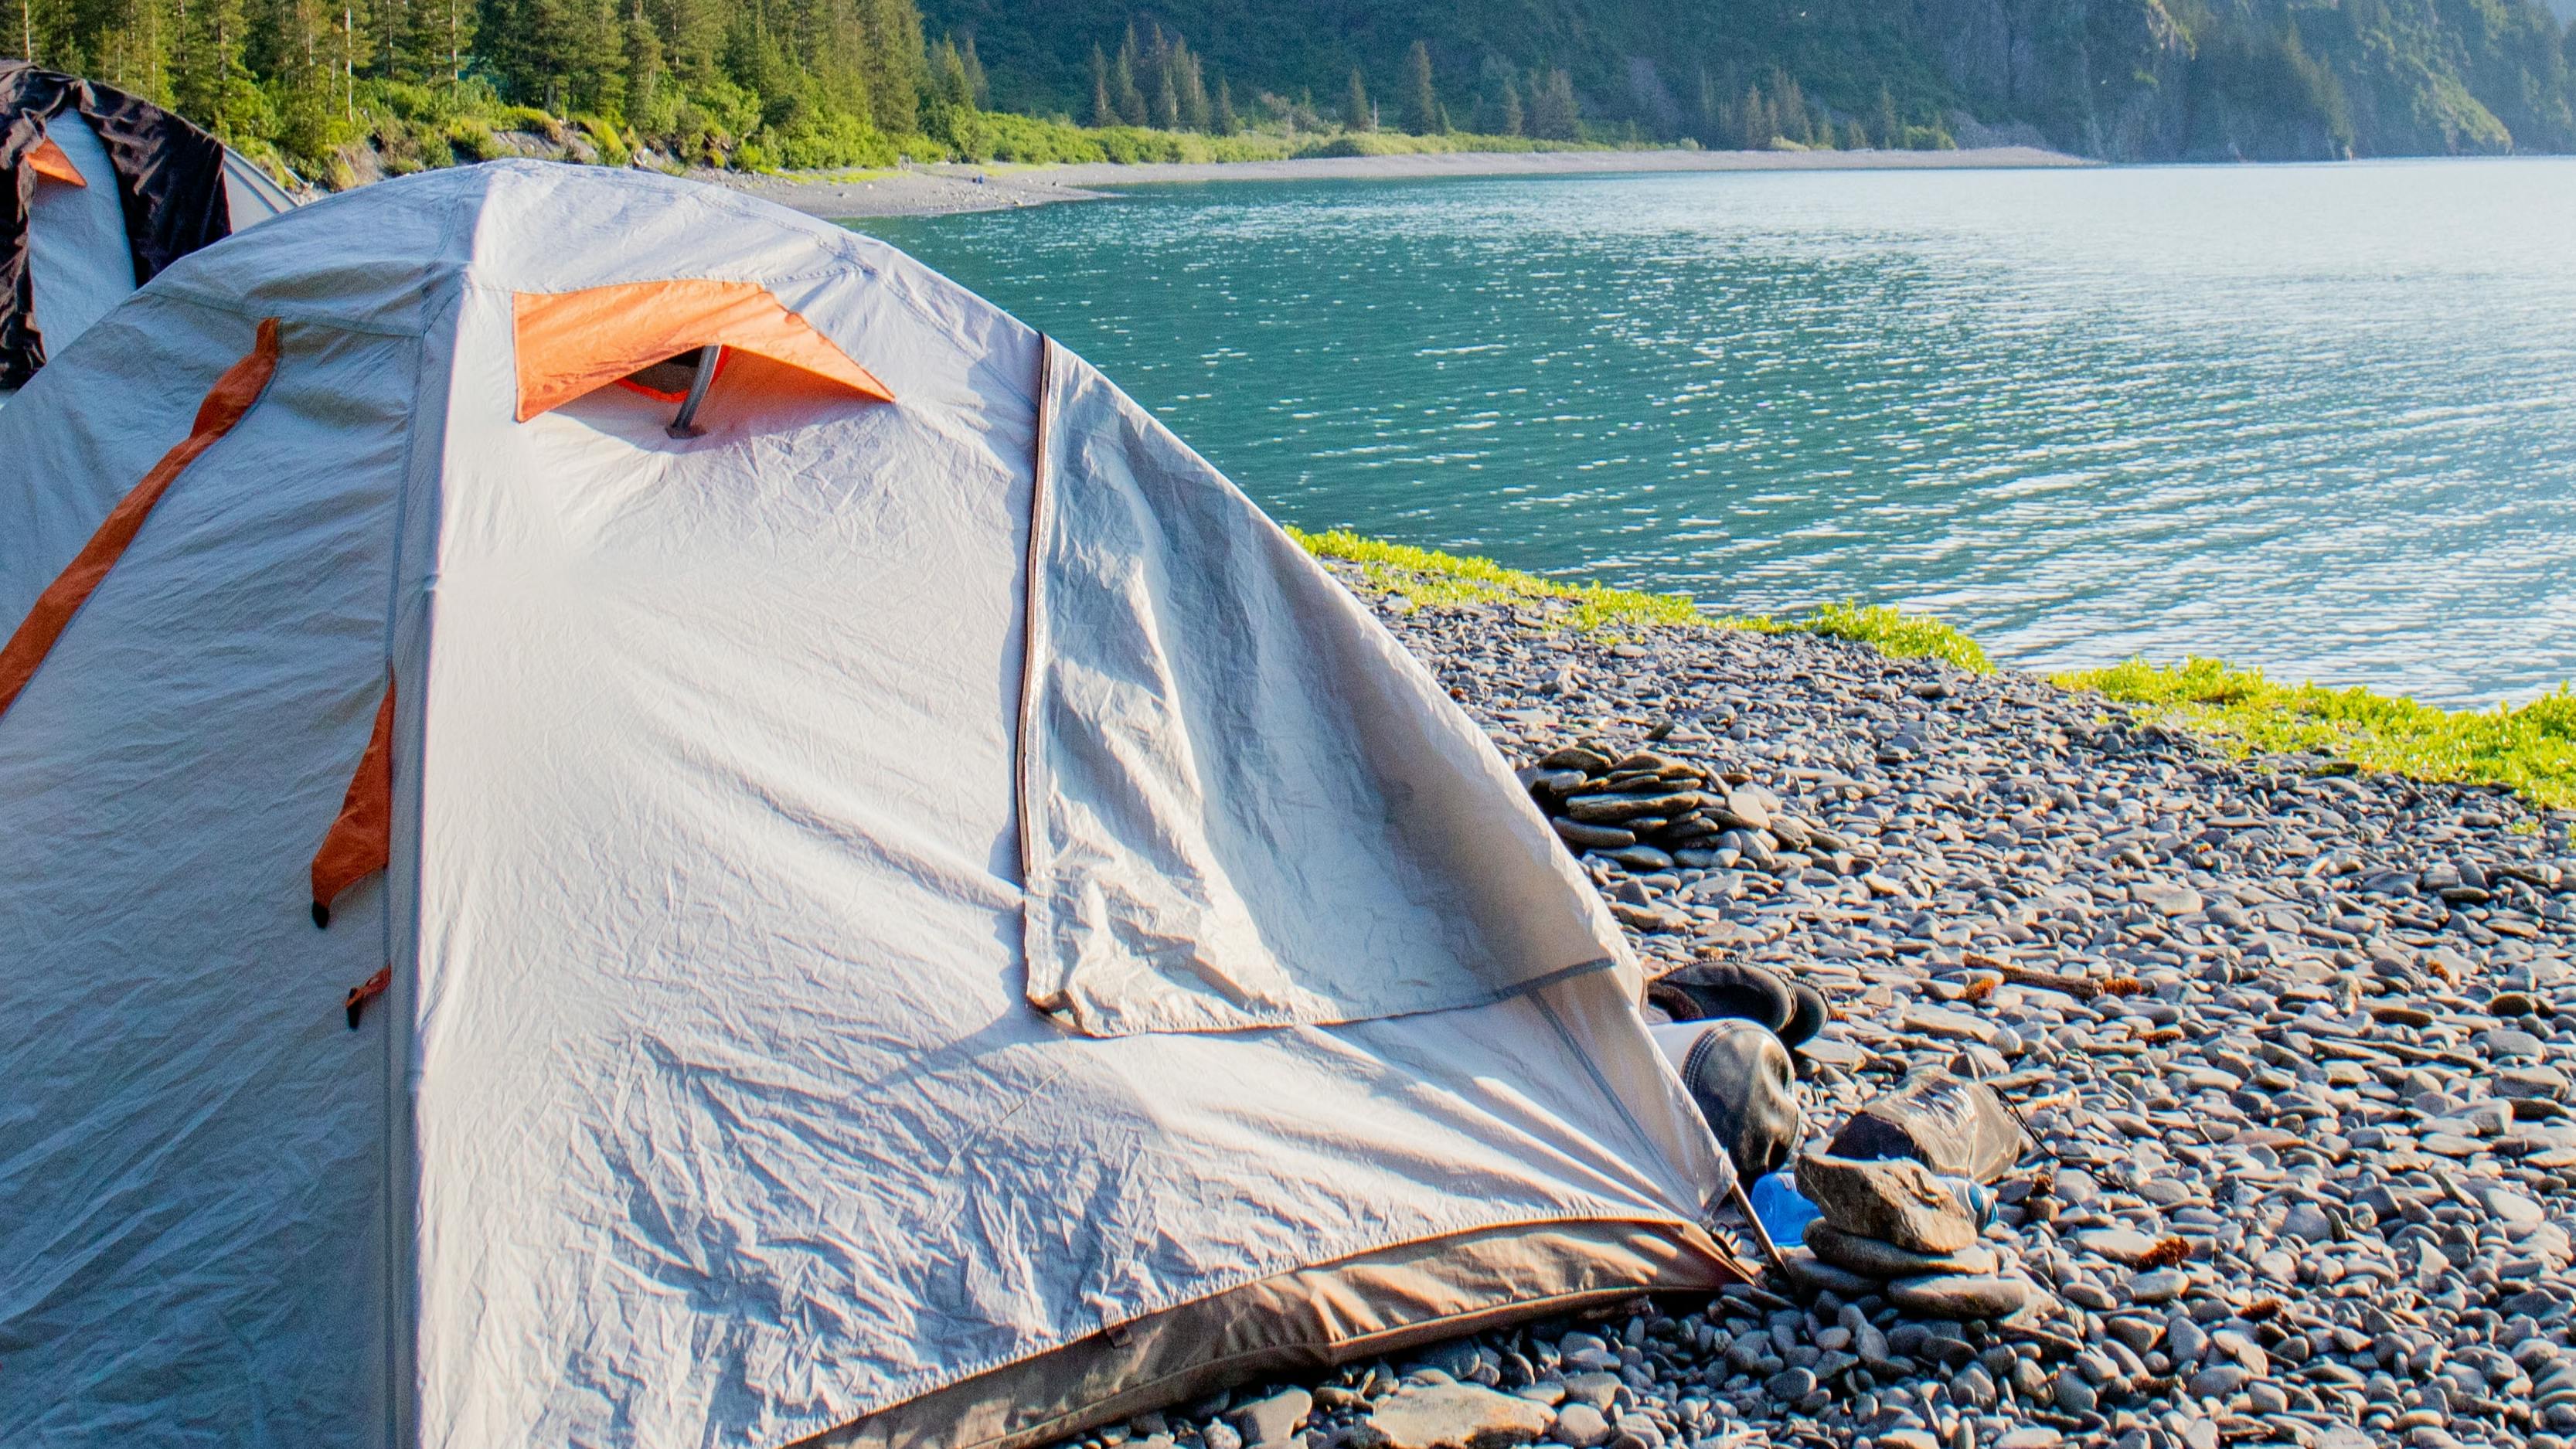 Two grey and orange tents are pitched by the edge of a lake. There are some pants drying on top of one of the tents.